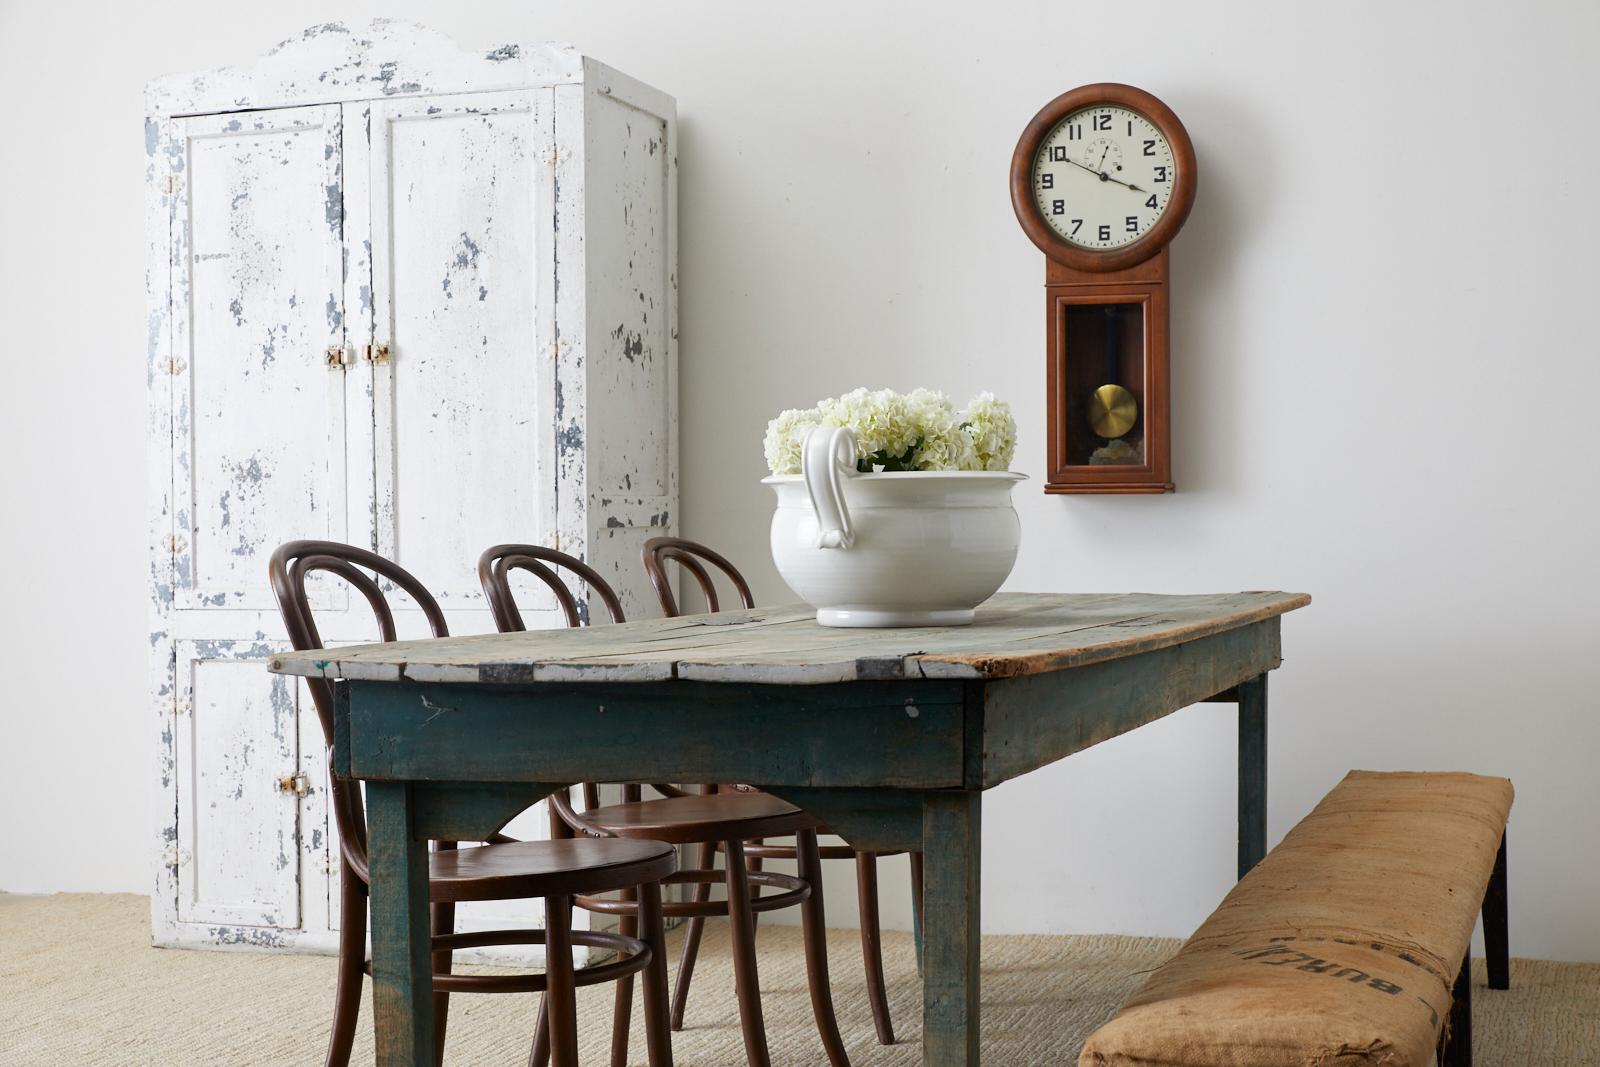 Rustic late 19th century classic American pine farmhouse work table or dining table. Features a long plank top conjoined to a teal green painted frame. The table is supported by square legs that taper on the ends. Beautifully aged and worn pine